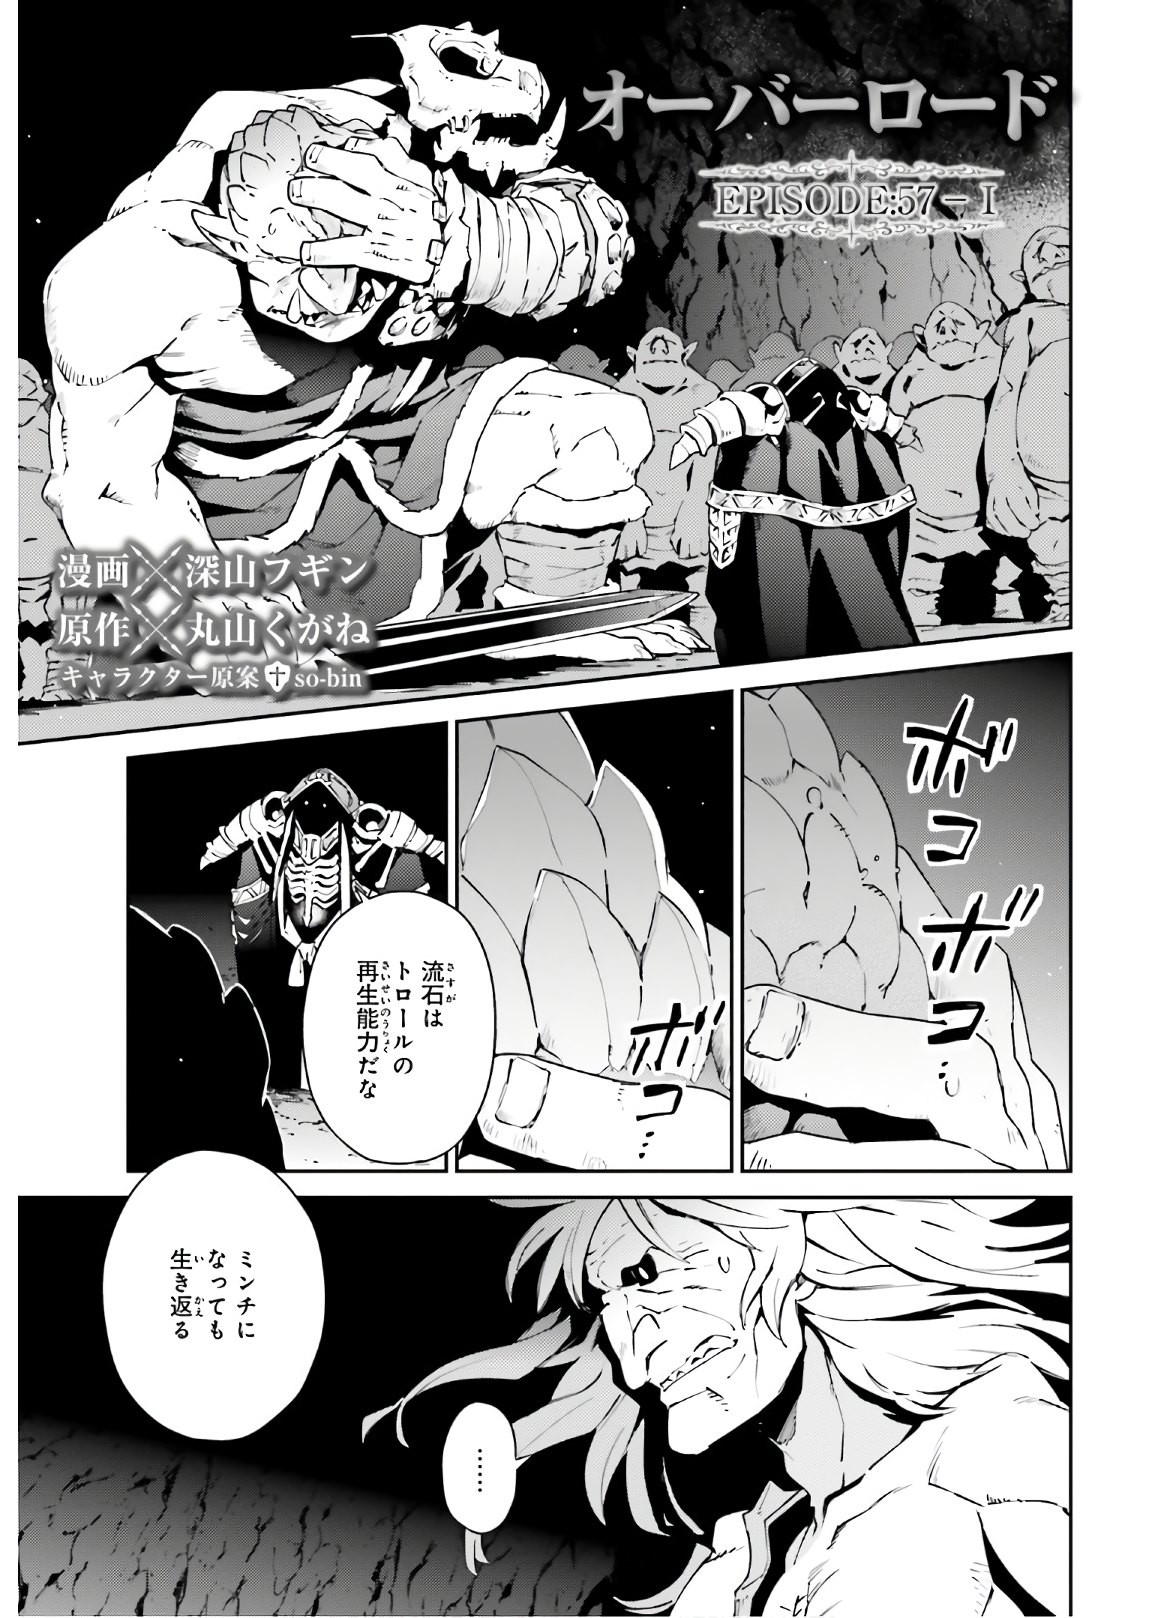 Overlord - Chapter 57-1 - Page 1